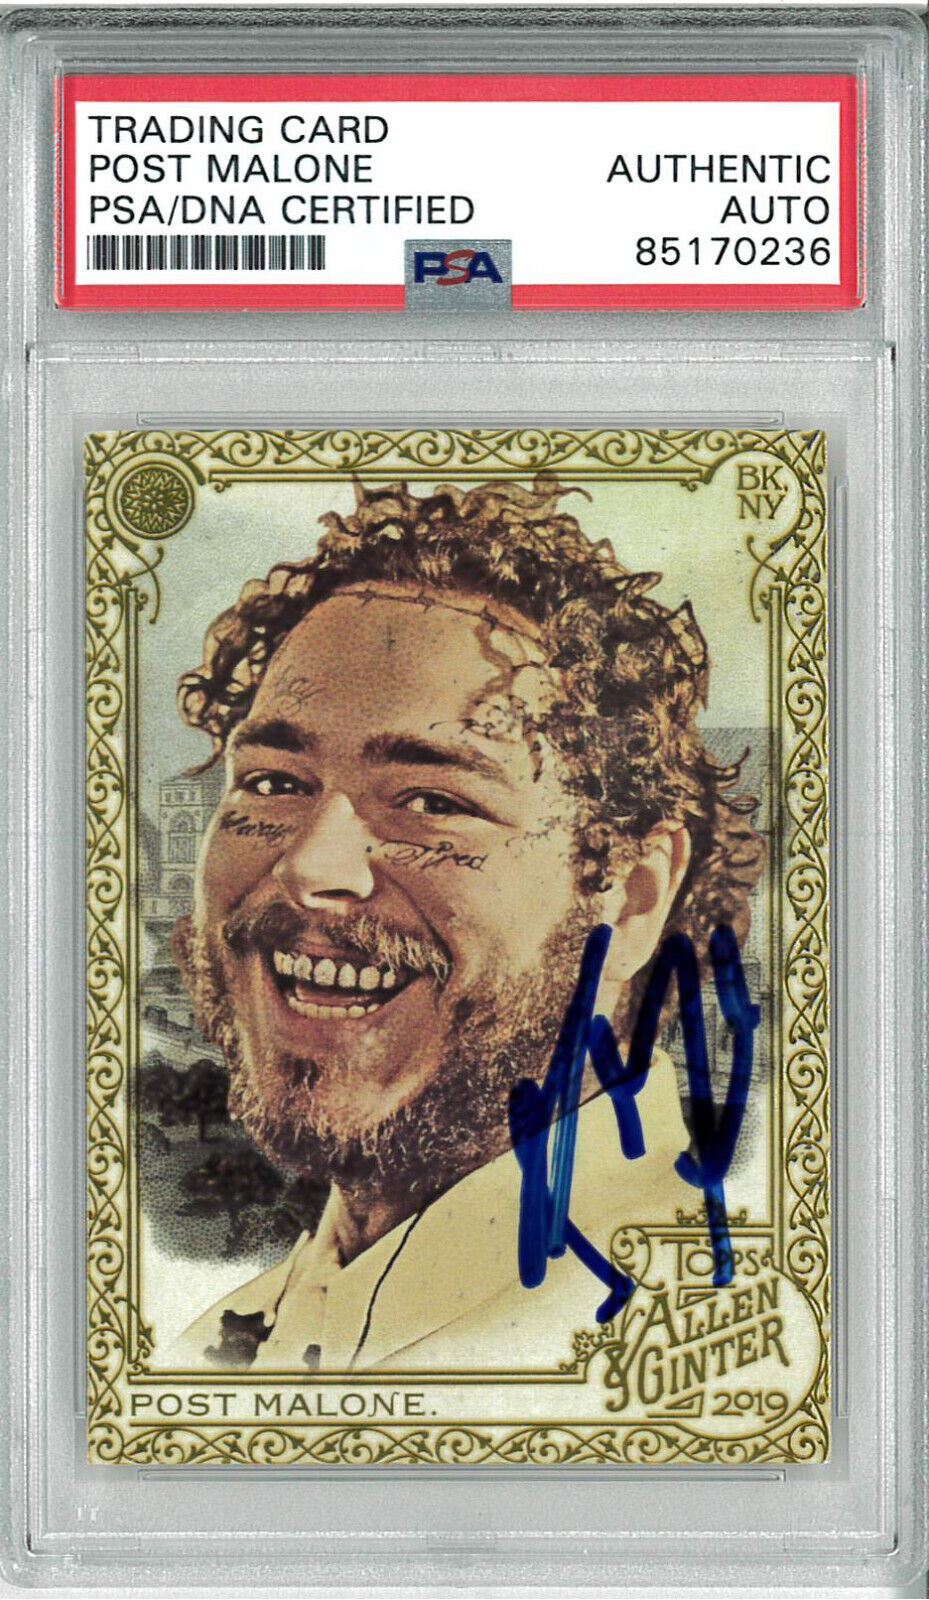 Post Malone Signed Autograph Slabbed 2019 Topps Allen & Ginter Card PSA DNA